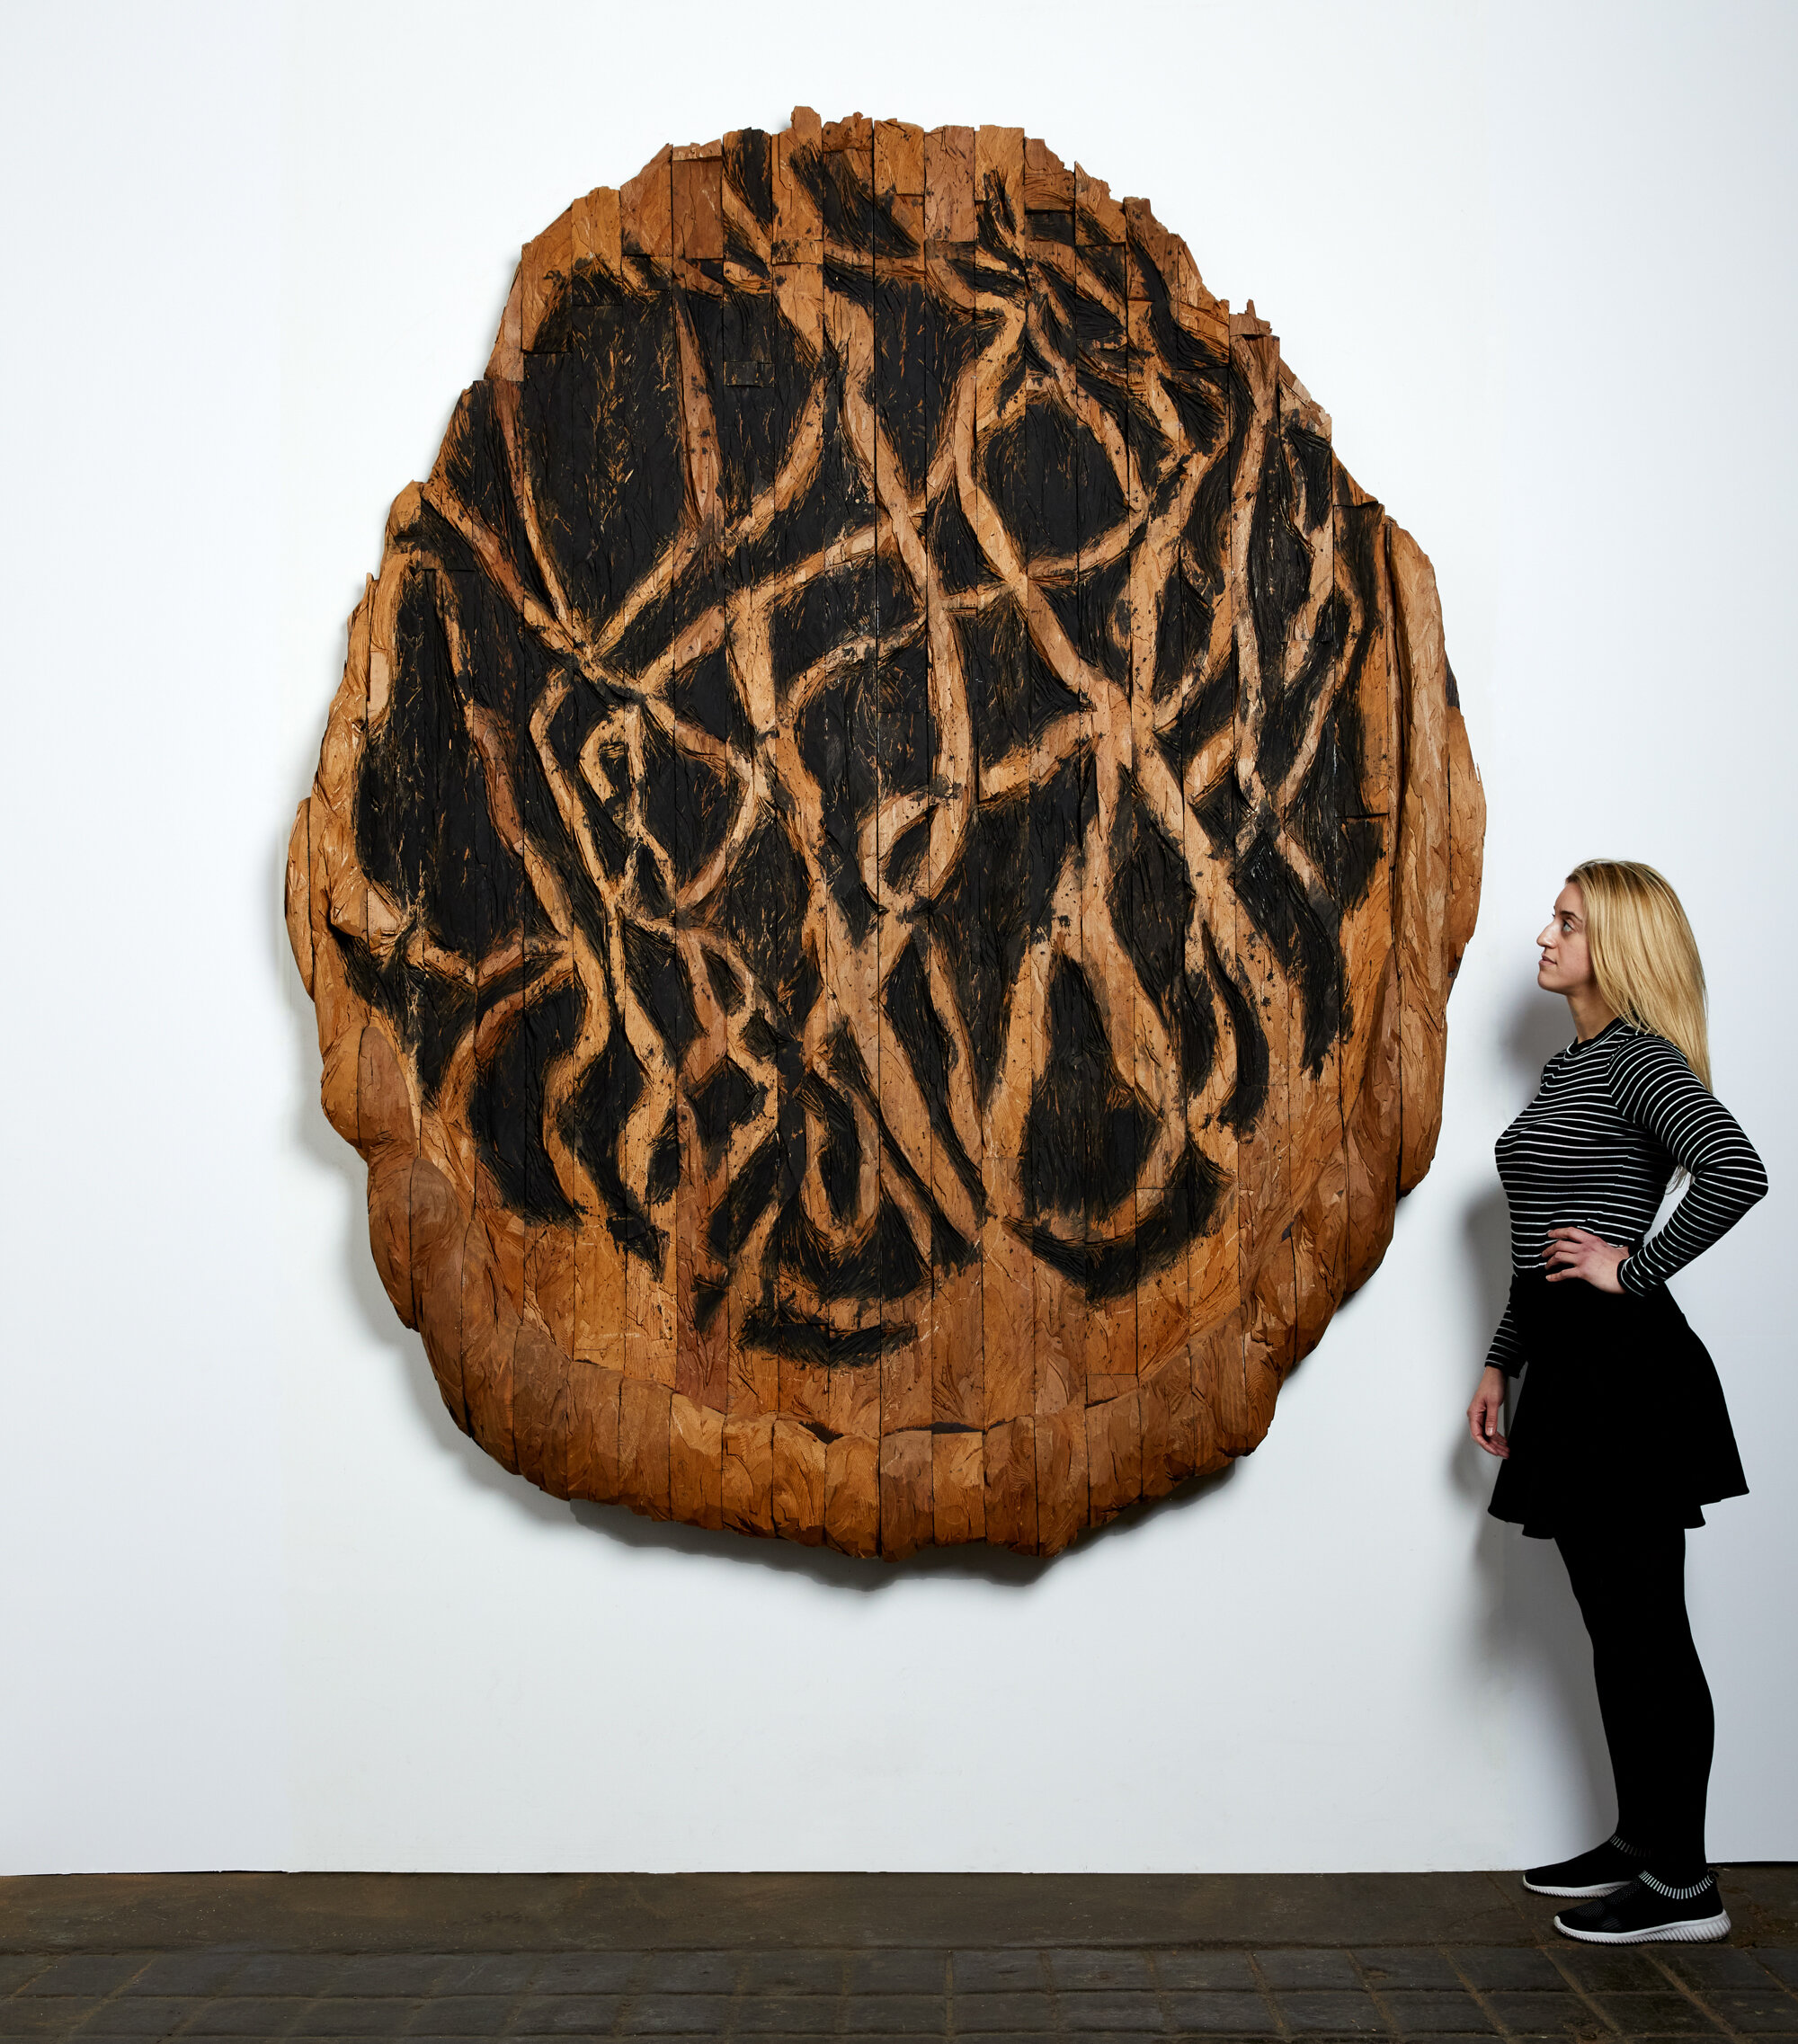   Black Tongue Plate (MATA) , 2008 Cedar and pigment 100 x 81 x 7 in.    Galerie Lelong &amp; Co.  